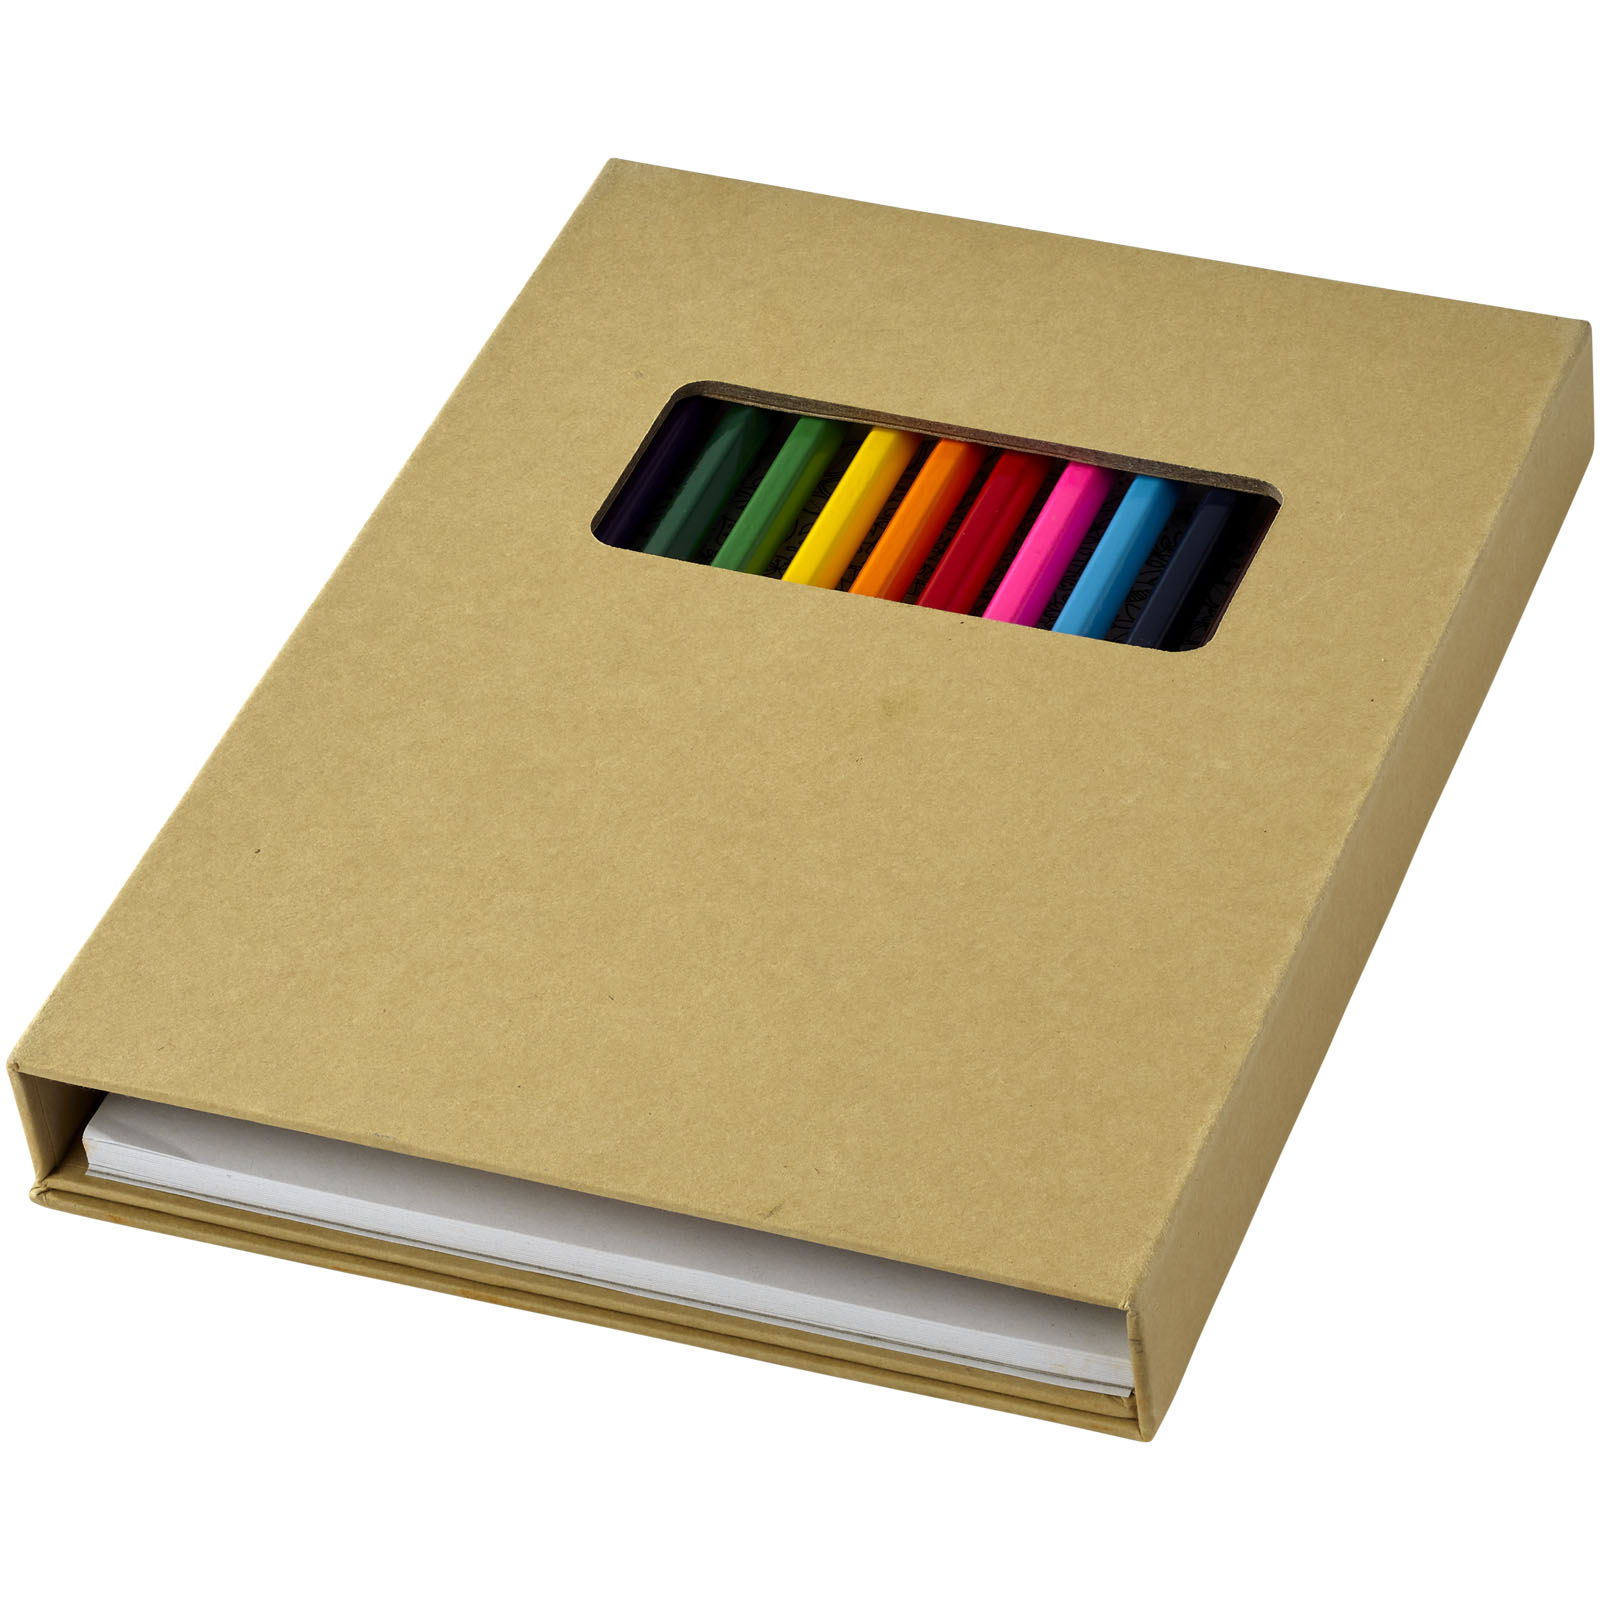 Advertising Colouring sets - Pablo colouring set with drawing paper